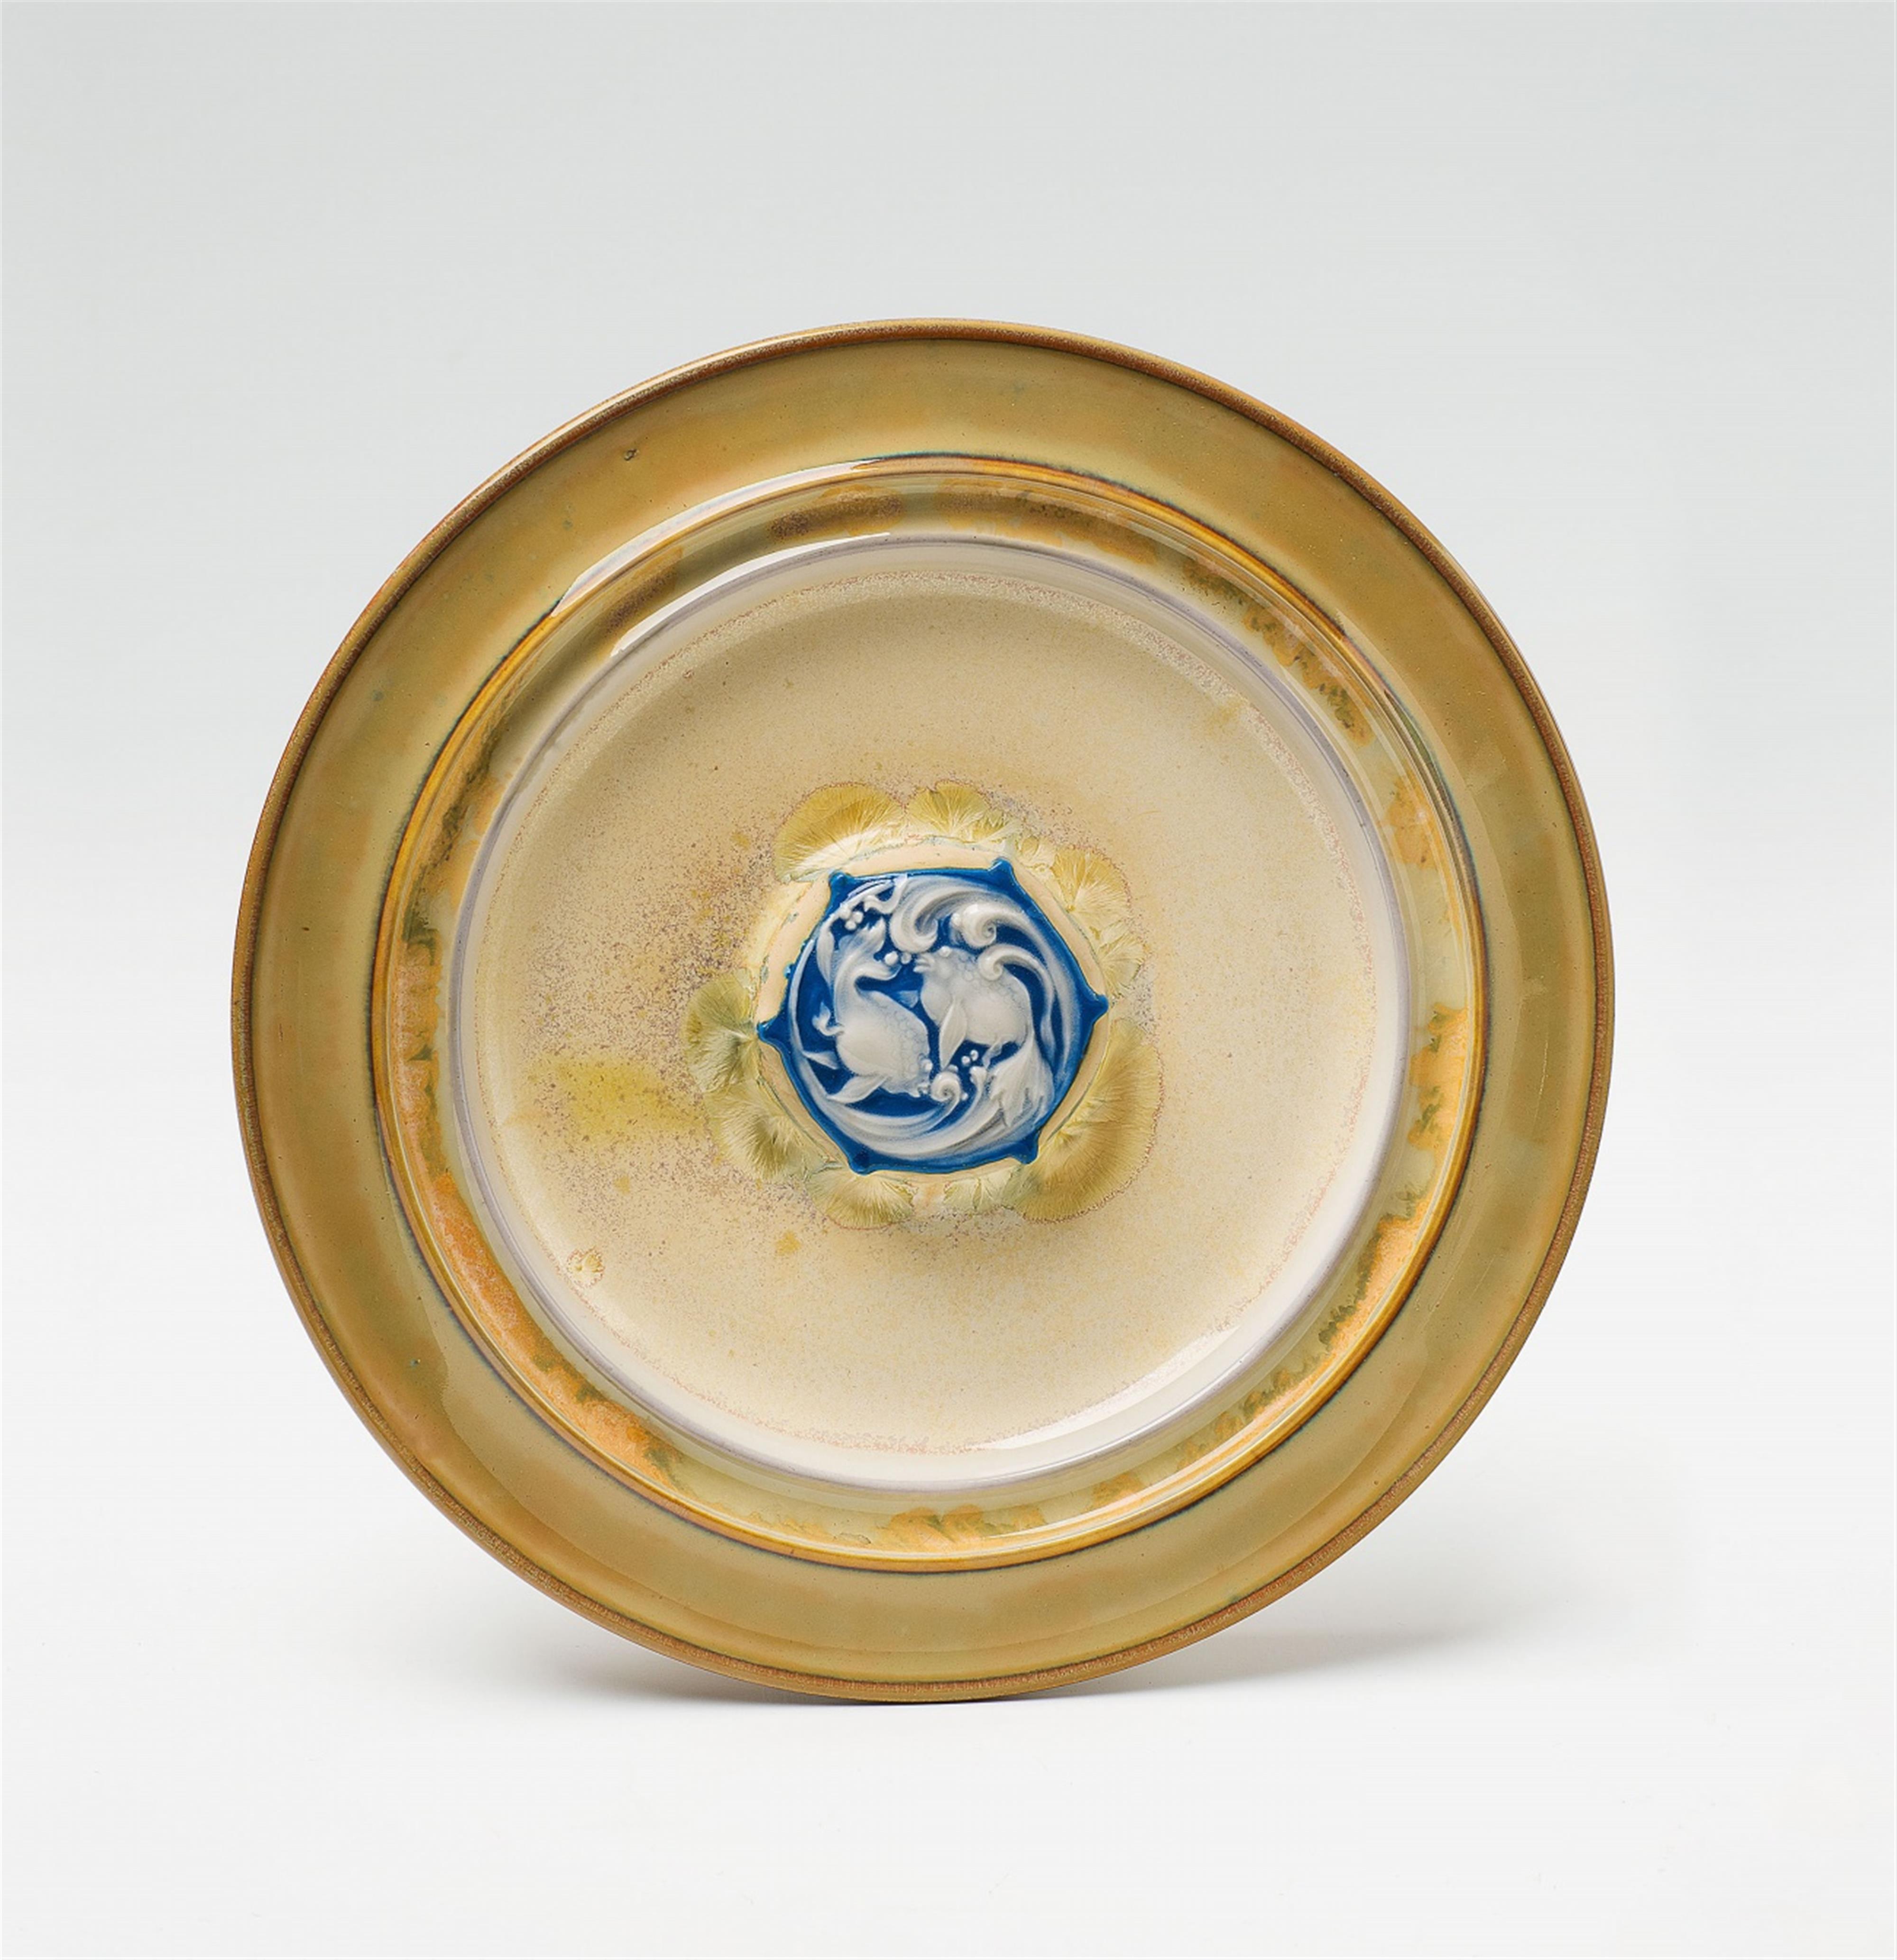 A Sèvres porcelain plate with fish decor by Taxile Doat - image-1